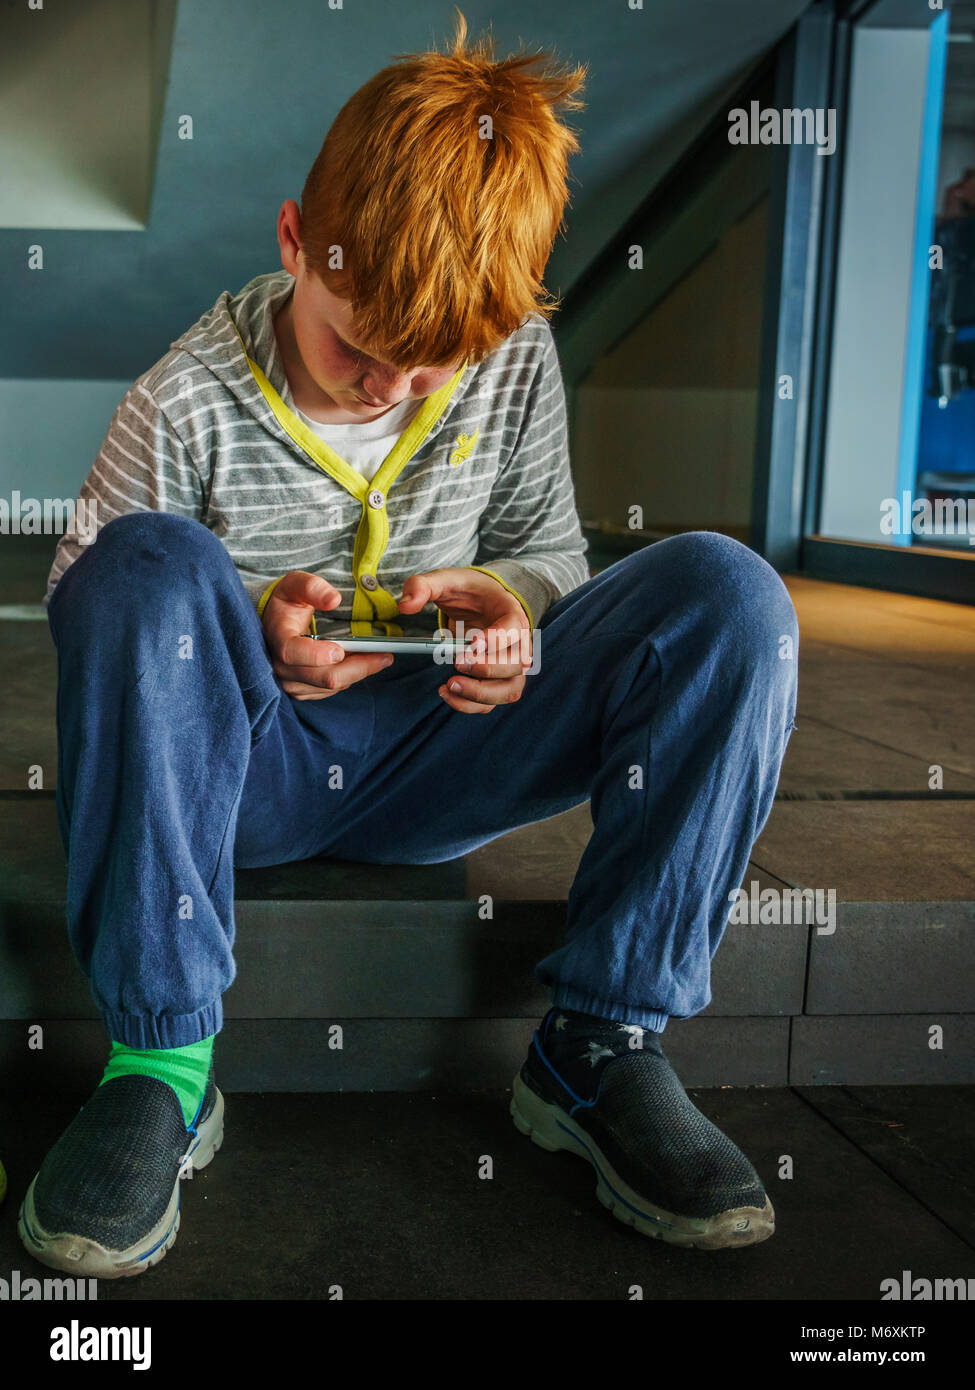 Redheaded young boy looking at a smartphone, Reykjavik, Iceland. Stock Photo